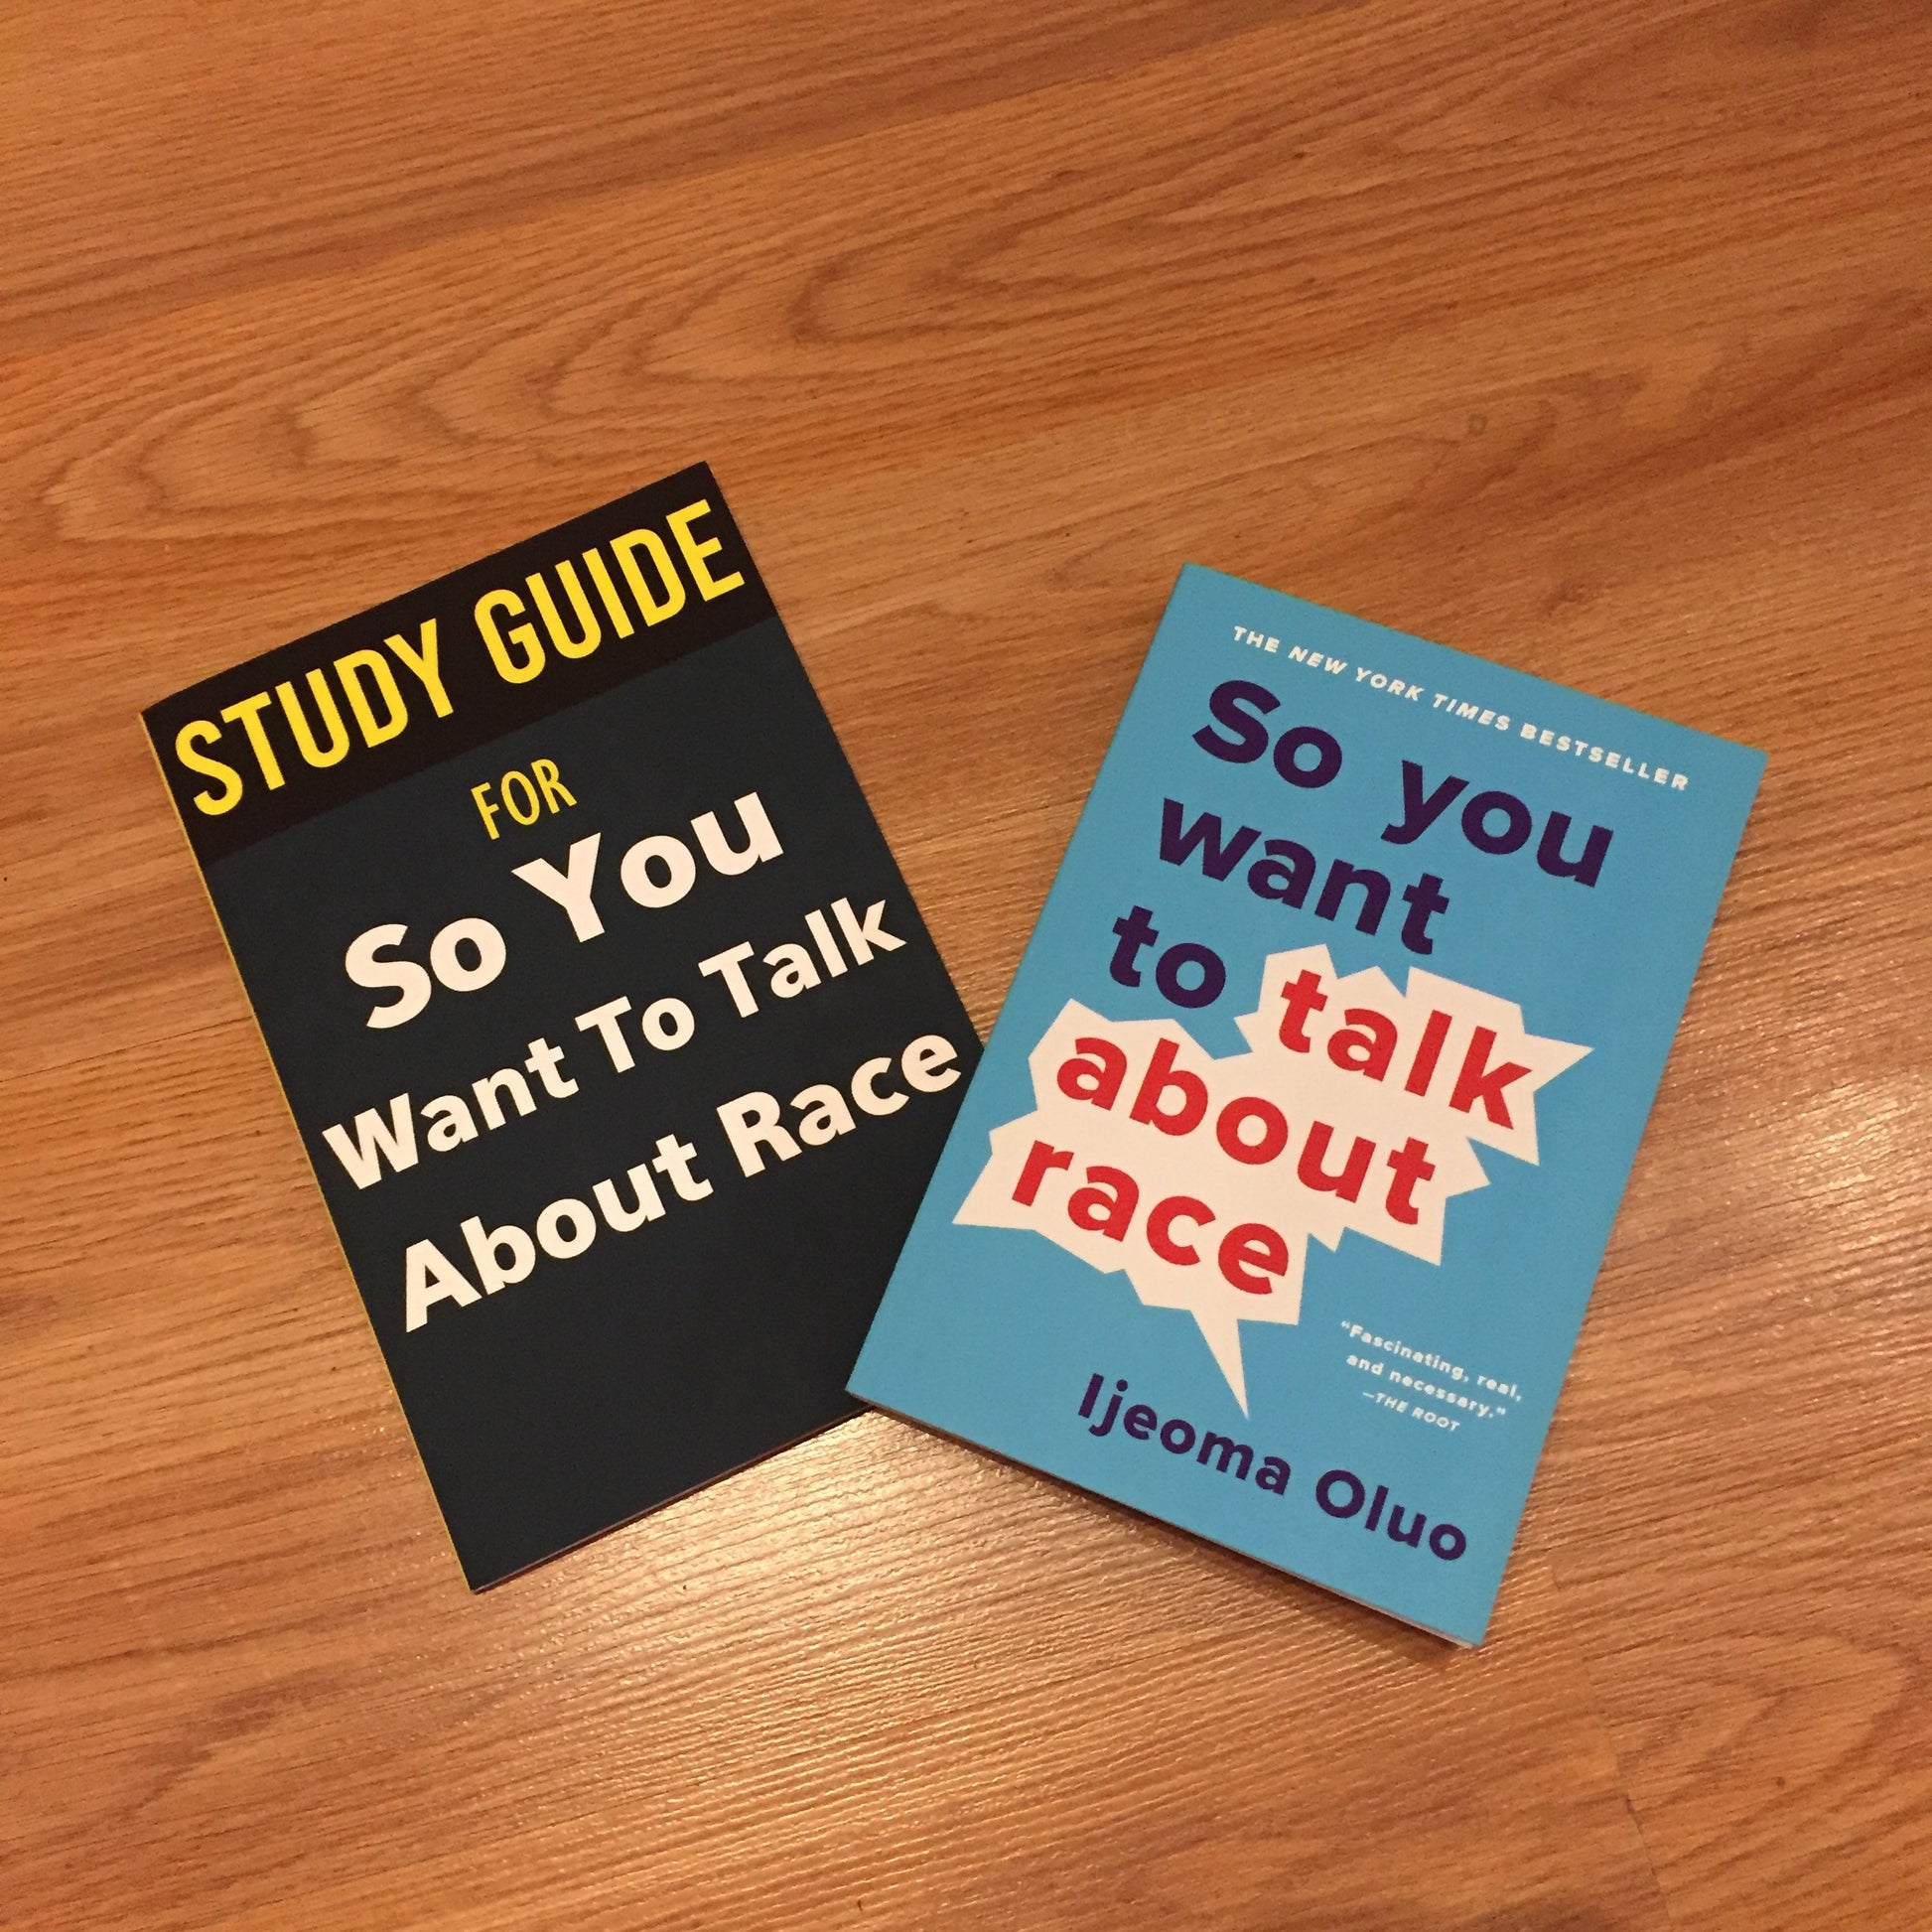 The books, "Study Guide For So You Want to Talk About Race", and So You Want to Talk About Race -  Ijeoma Oluo.